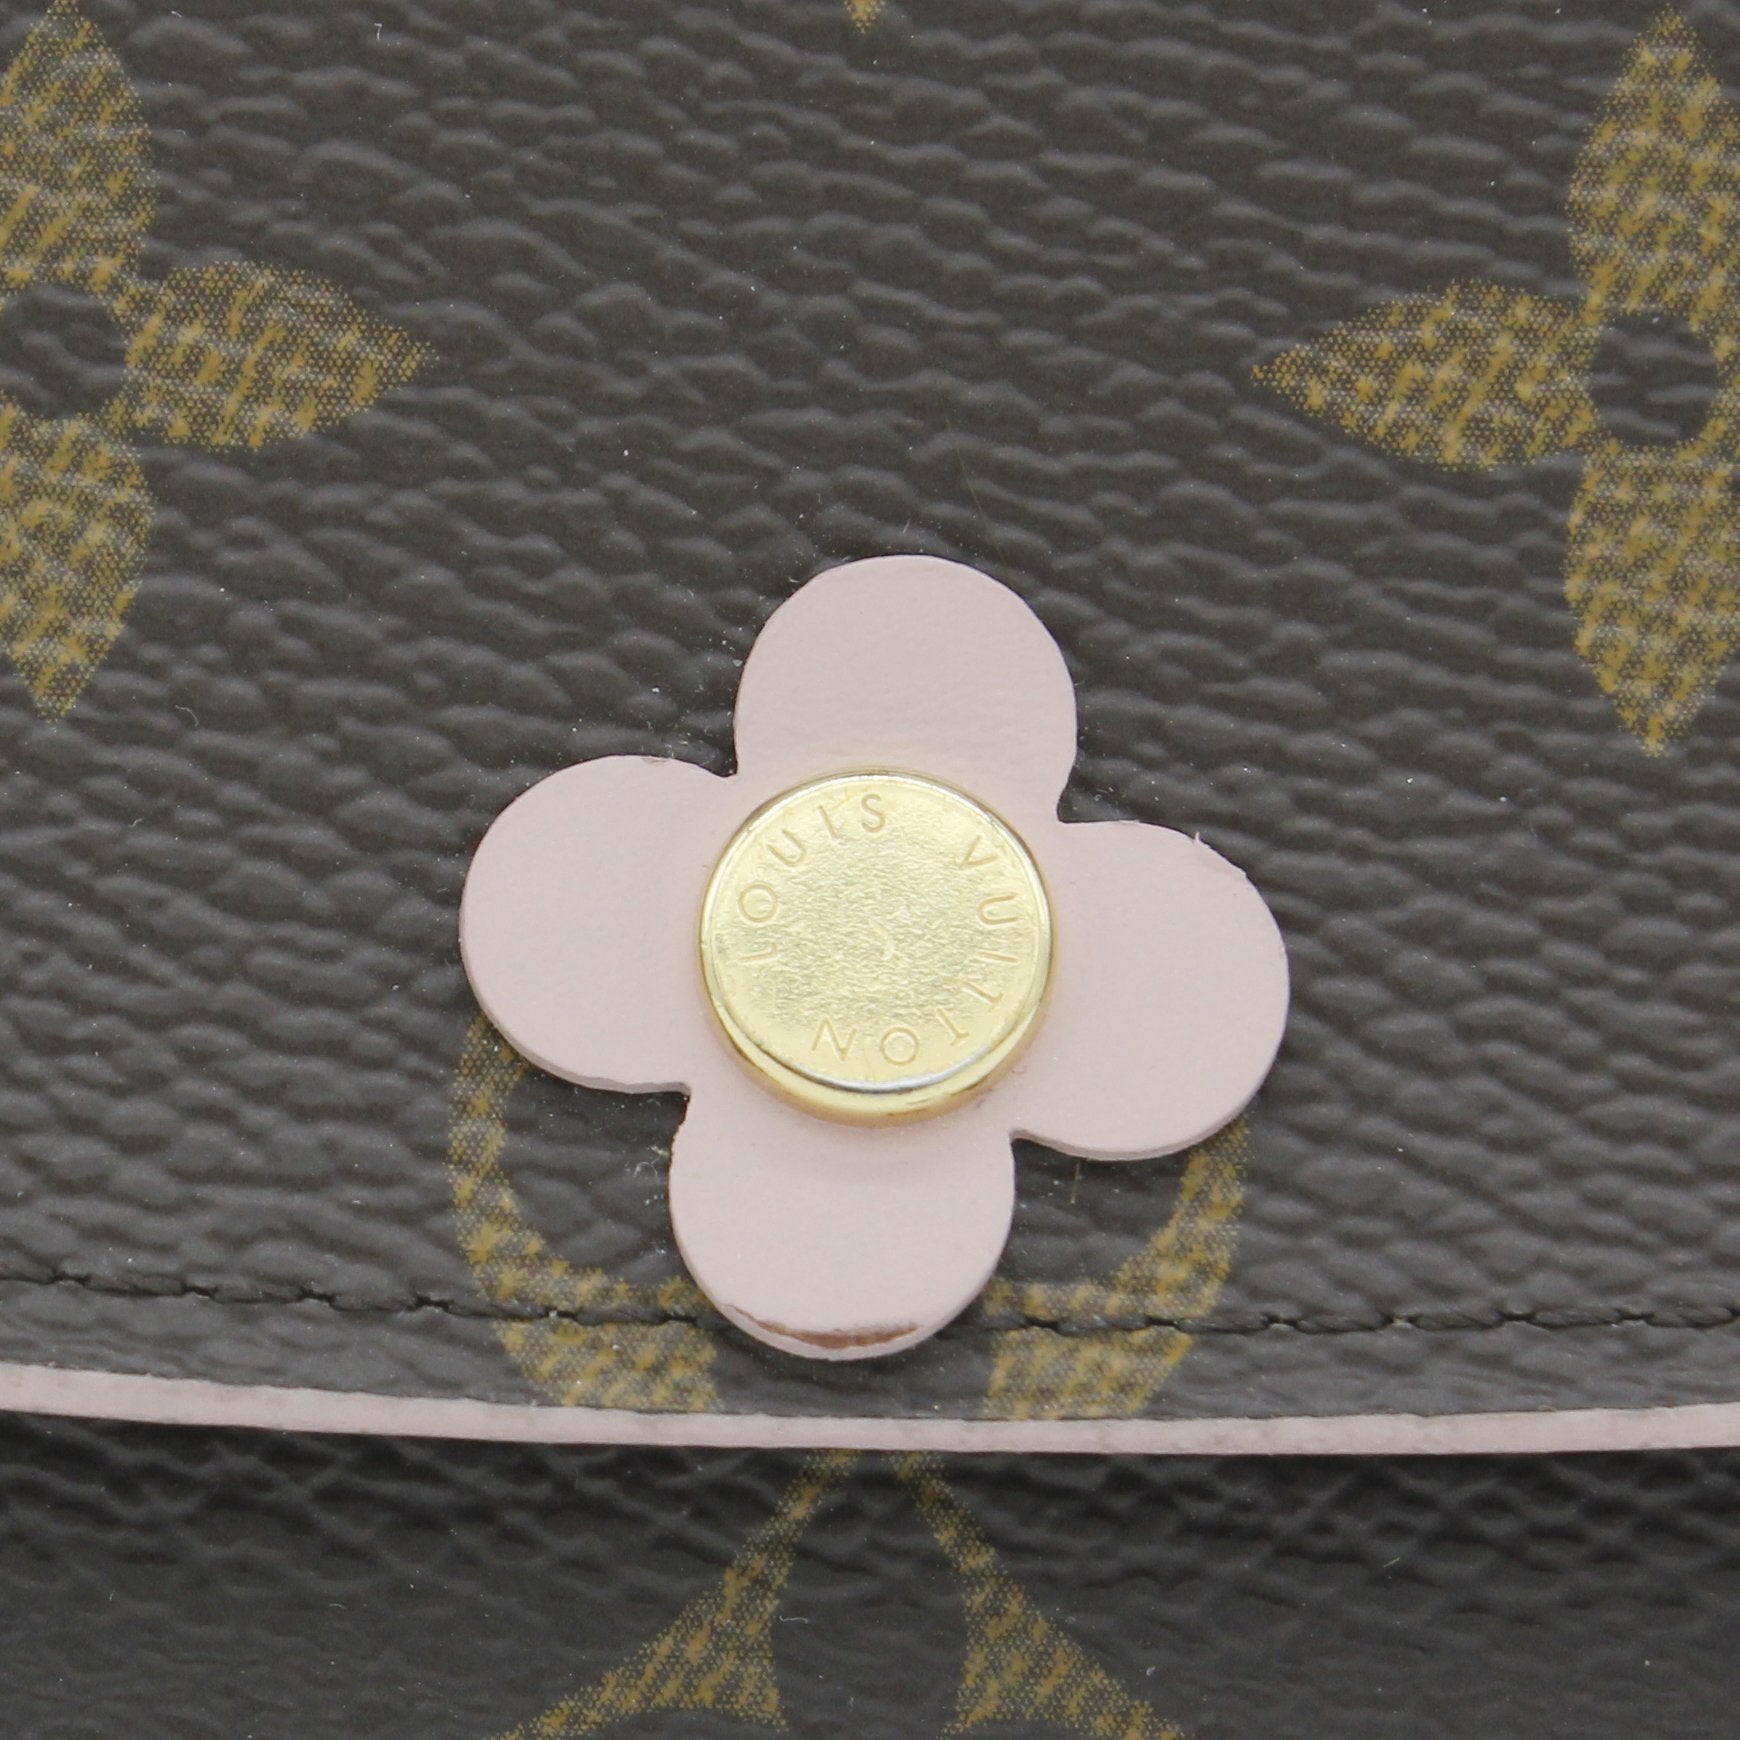 The front side of the Louis Vuitton monogram bloom flower emilie